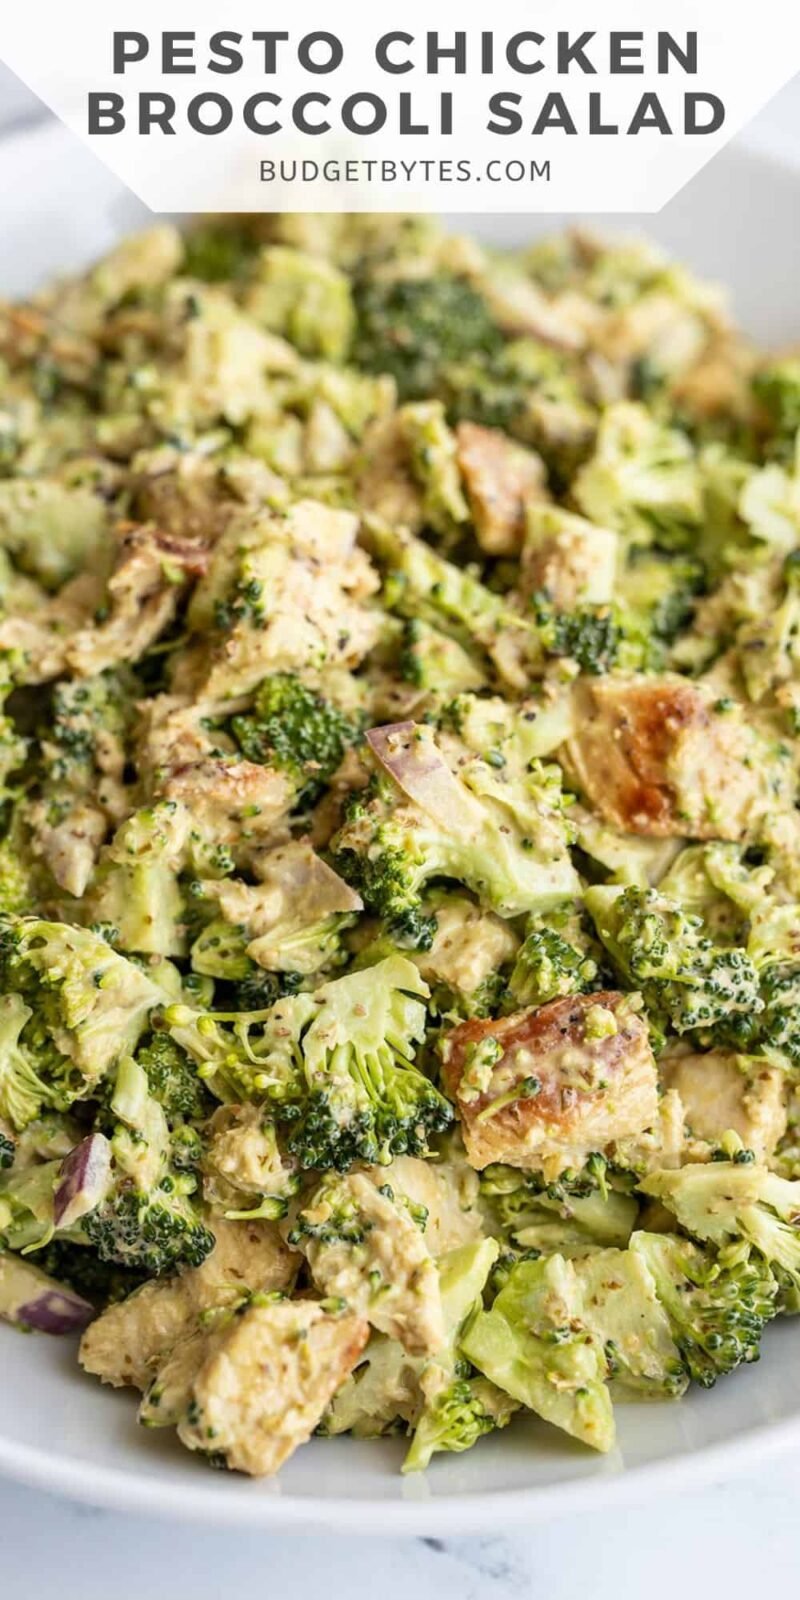 Close up of pesto chicken and broccoli salad in a bowl, title text at the top.